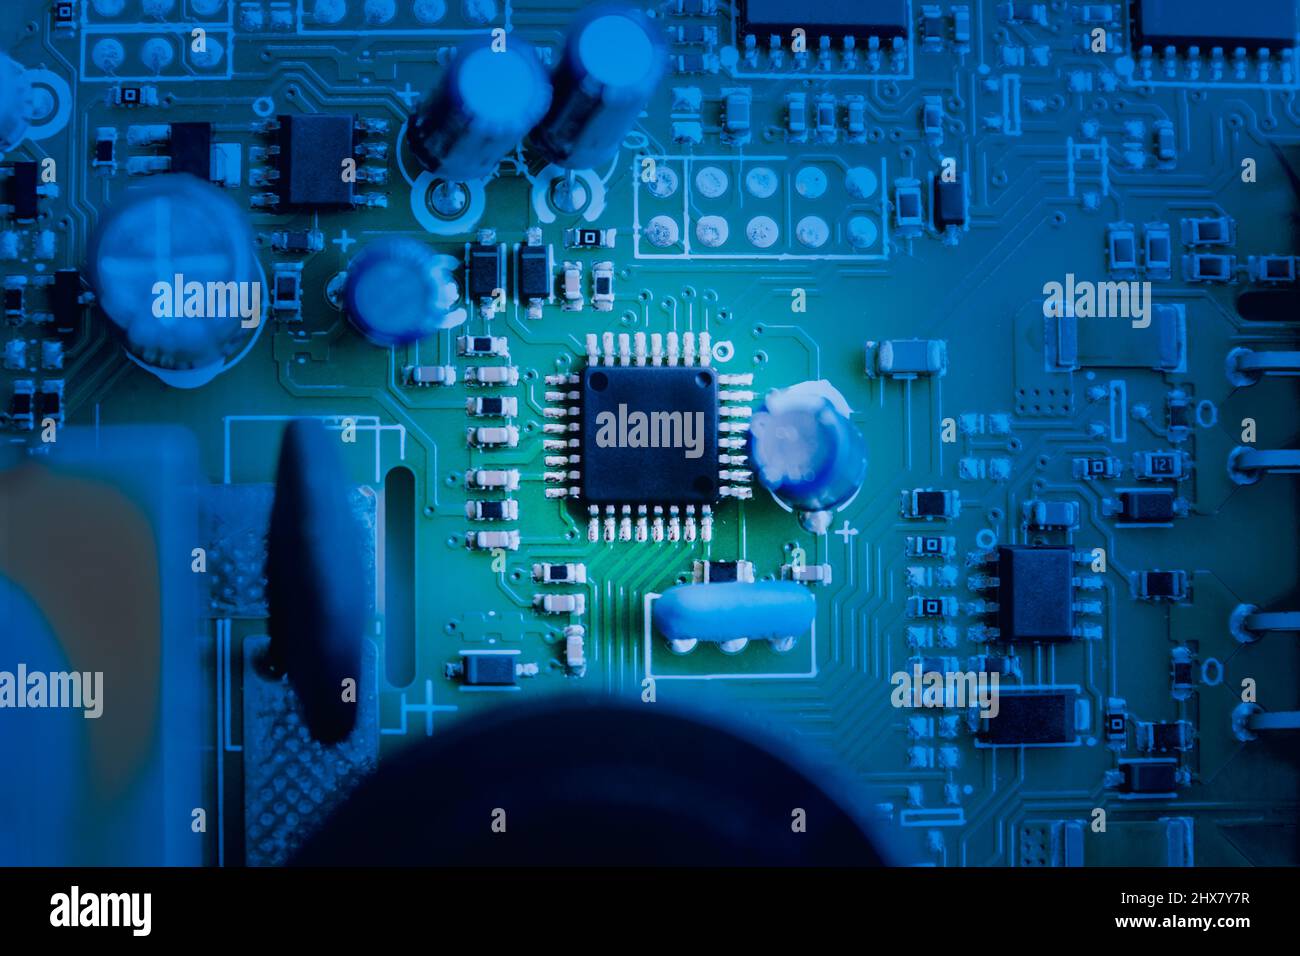 Close-up of electronic circuit board with SMD components and chips. Stock Photo